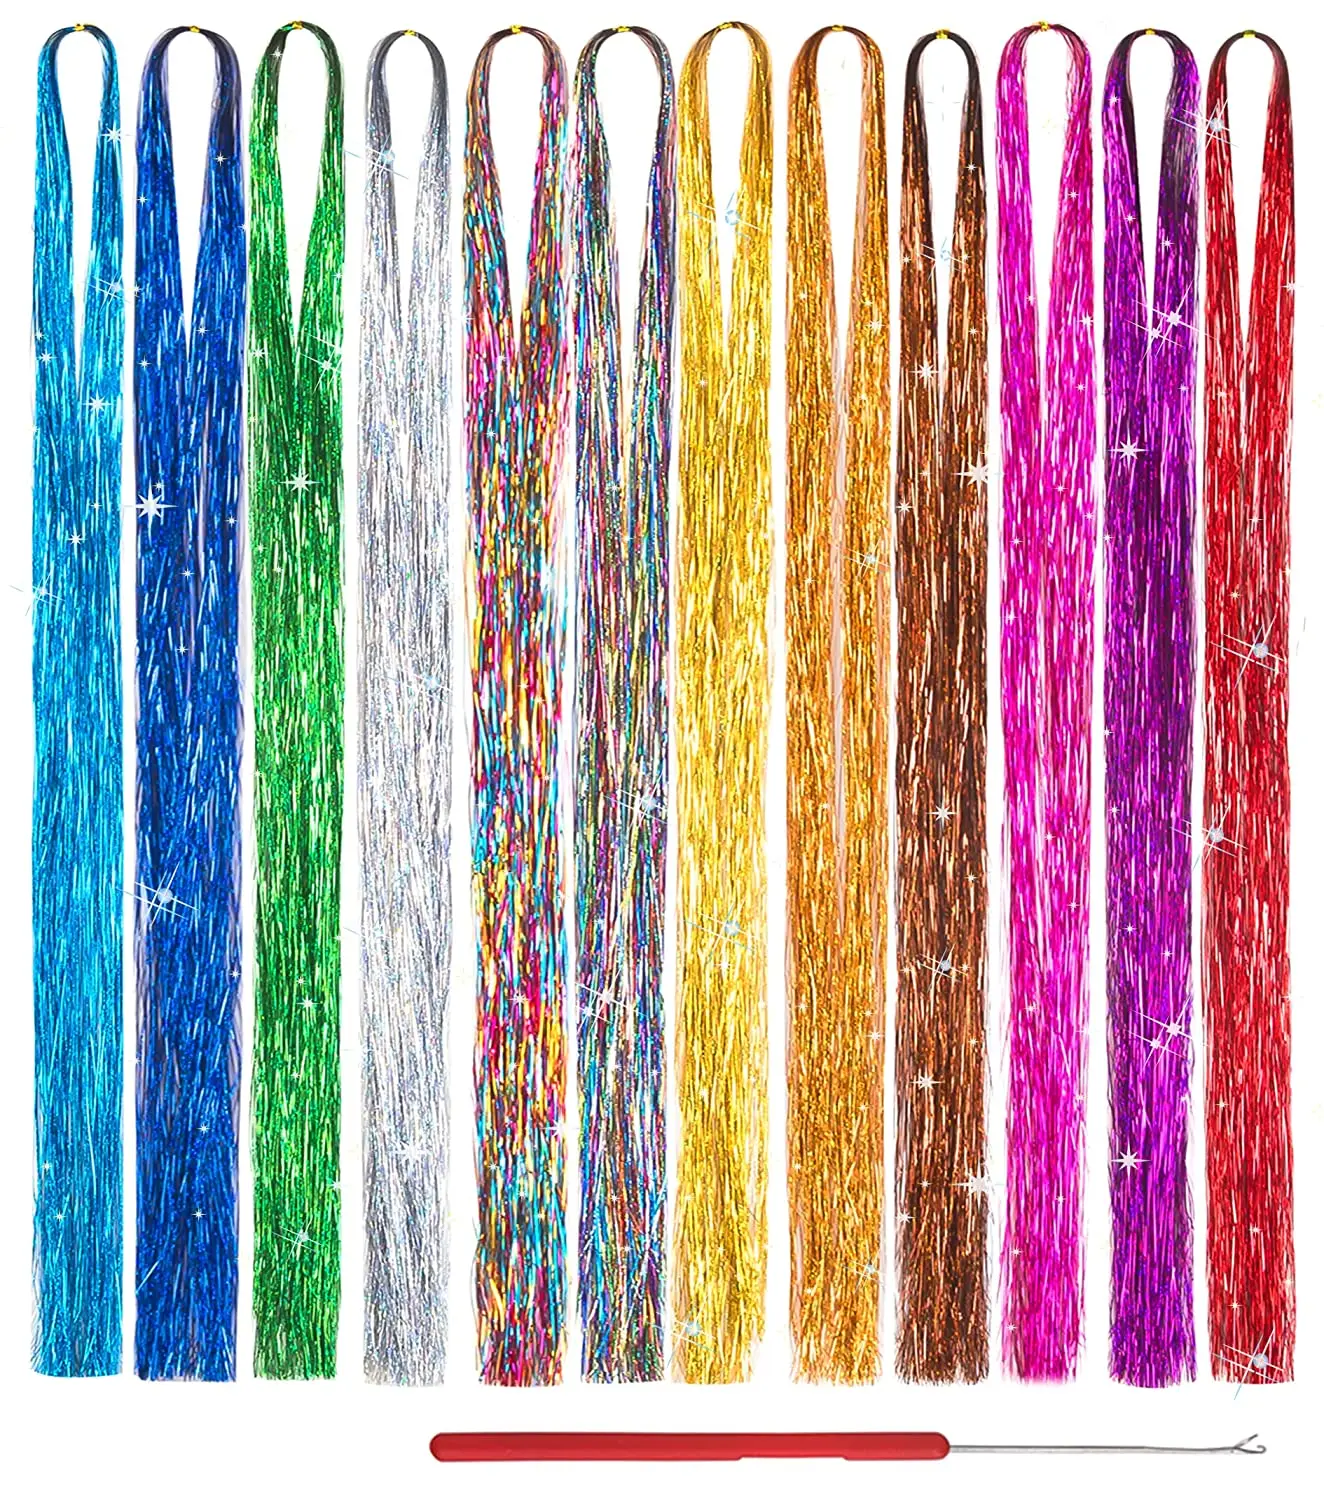 

My-diva 47 Inch 18 Colors Hair Tinsel With Tool Sparkling Dazzle Glitter Shiny Extensions Silk Tinsel